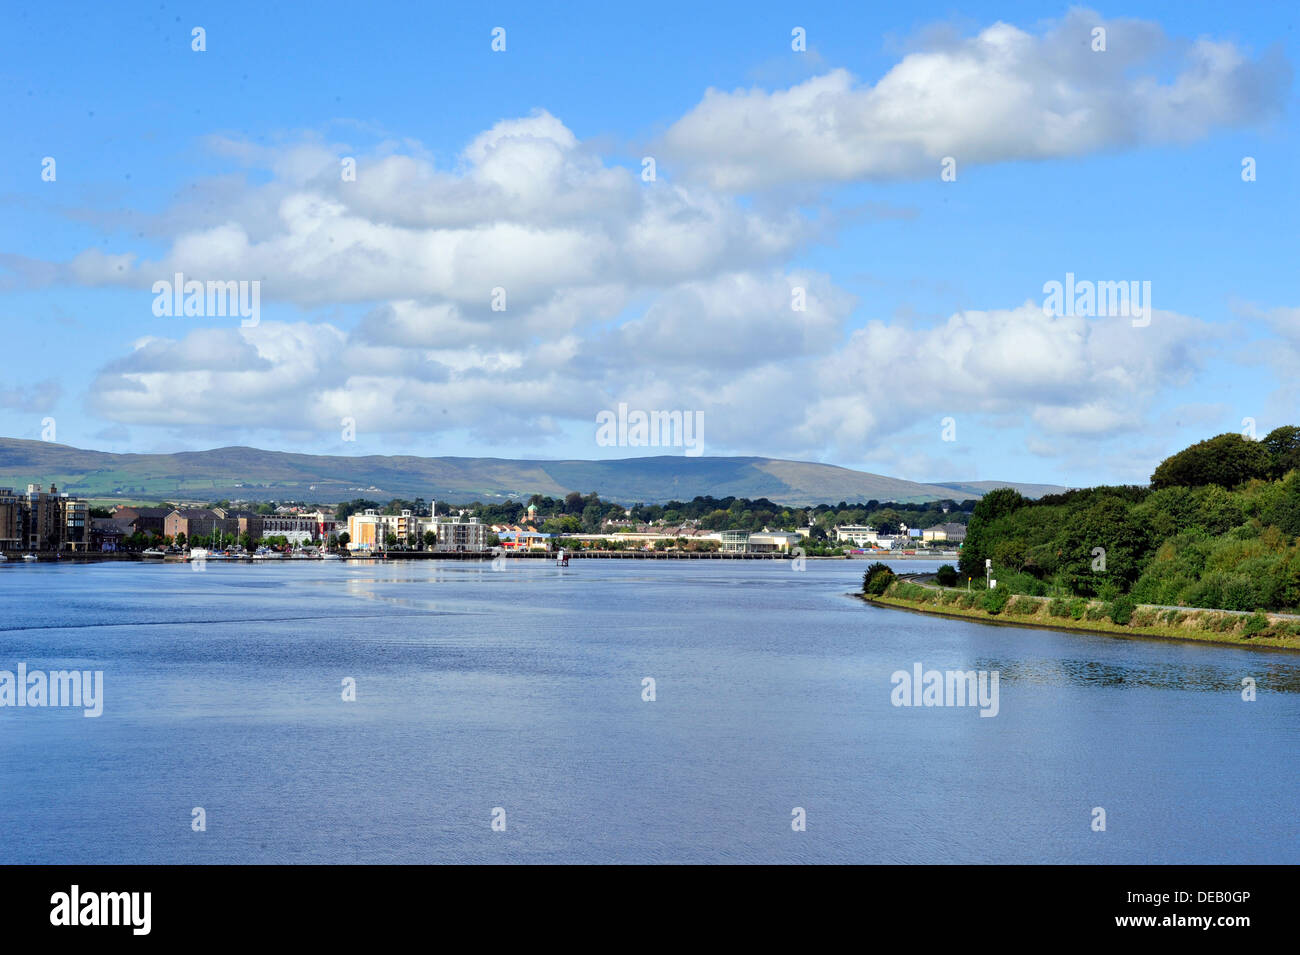 River Foyle and Foyle Embankment, Derry, Londonderry, Northern Ireland. Stock Photo